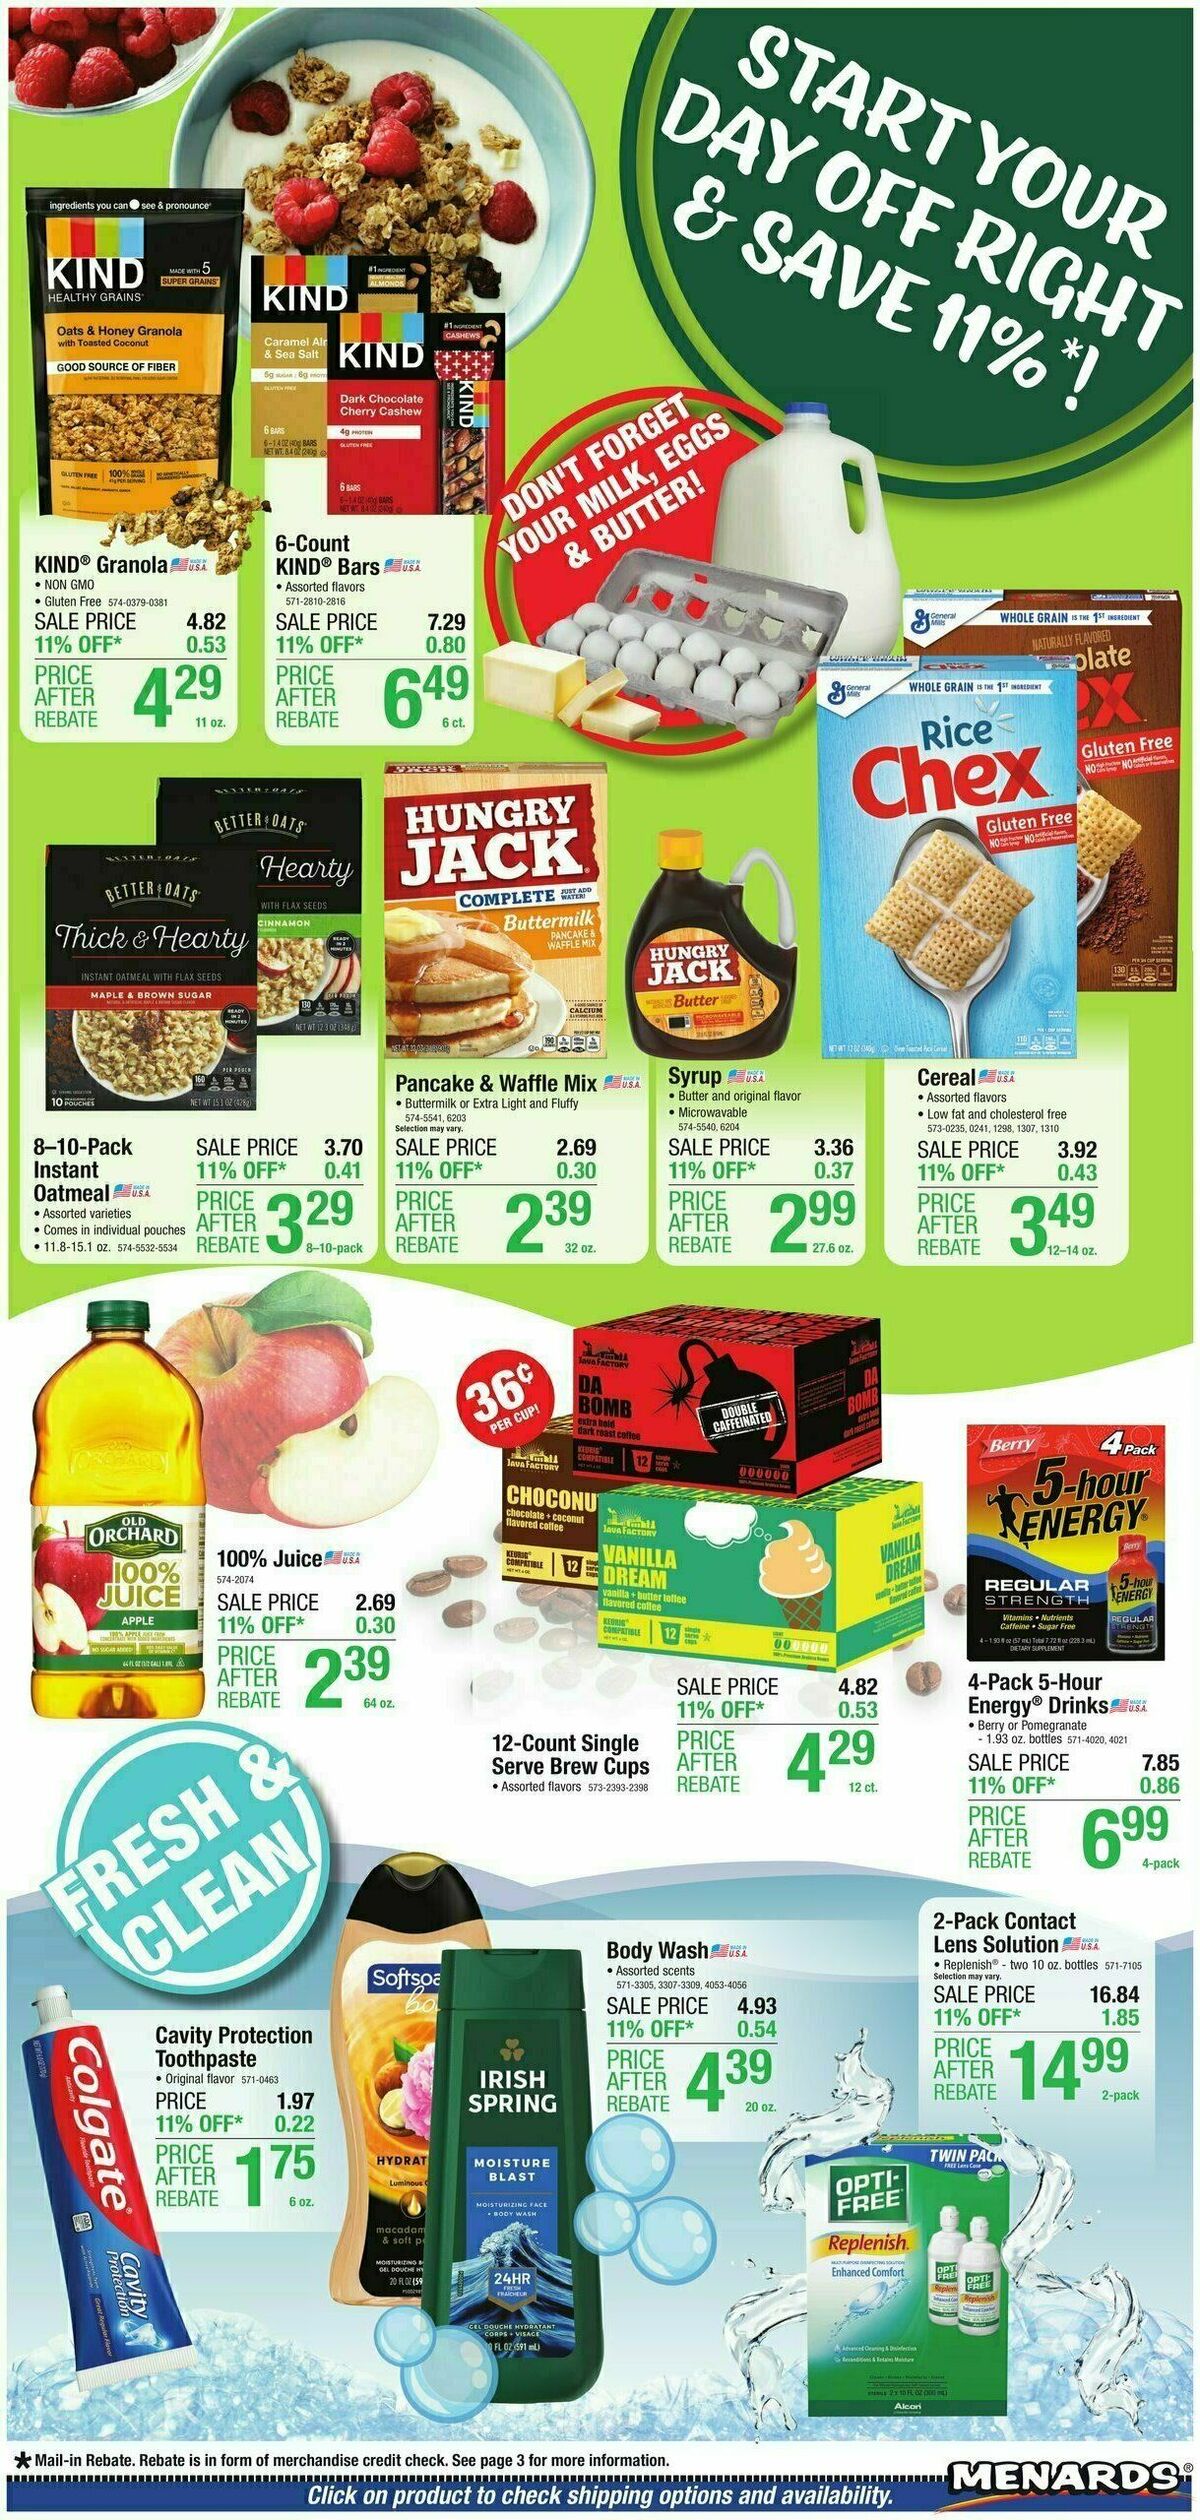 Menards Home Essentials Weekly Ad from July 26